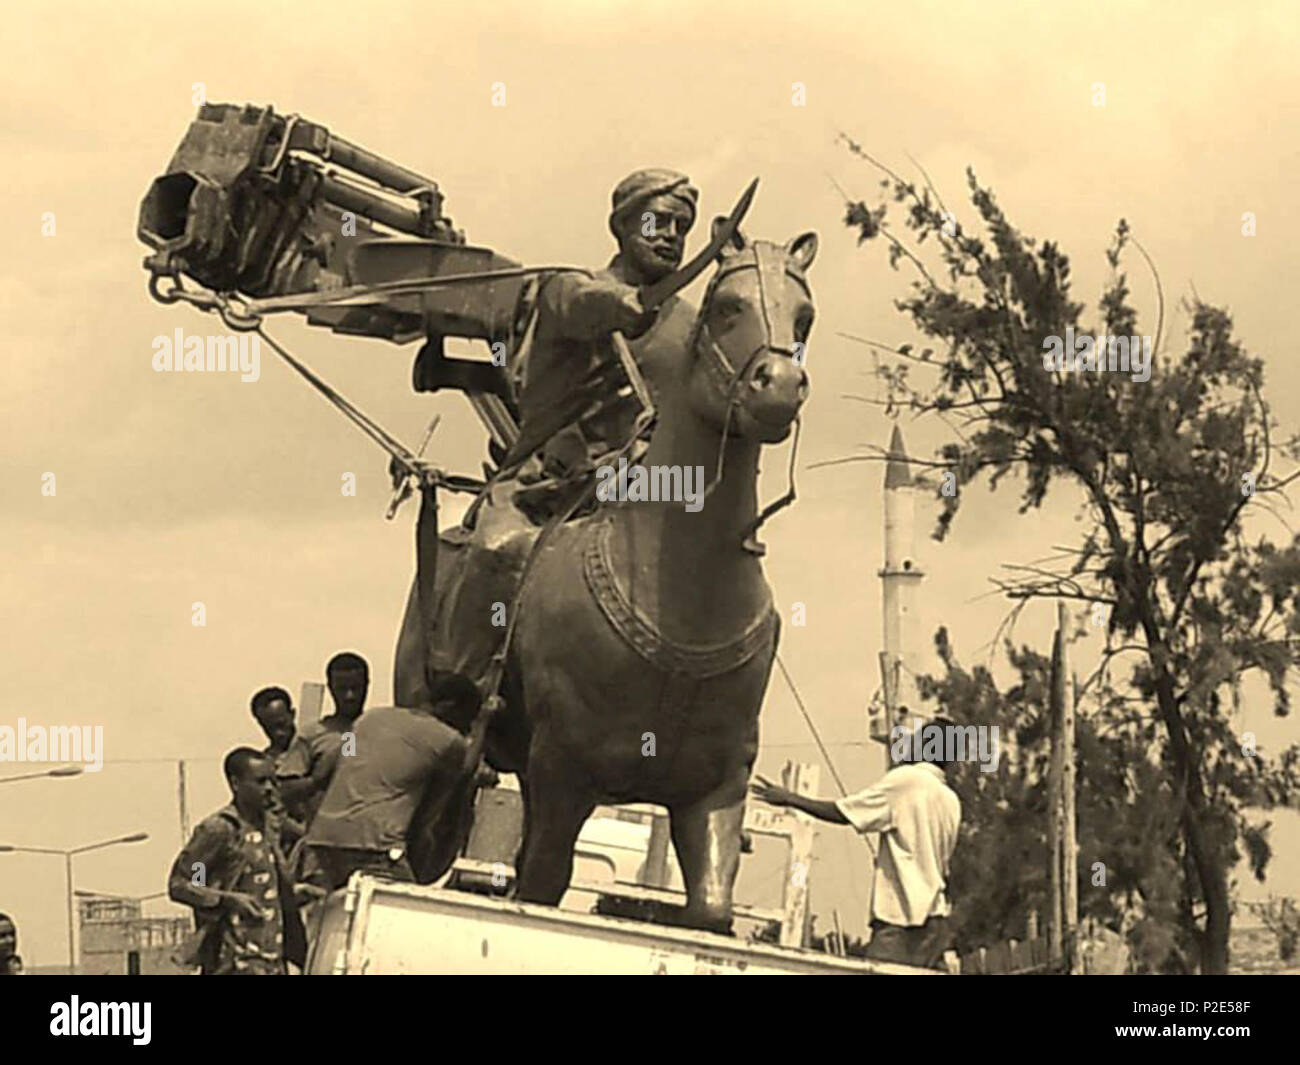 . English: Mohammed Abdullah Hassan's statue been removed from the Somali capital after the Siad Barre fled . between 1991 and 1993. Unknown 35 Mohammed Abdullah Hassan's statue been removed from the Somali capital after the Siad Barre fled Stock Photo